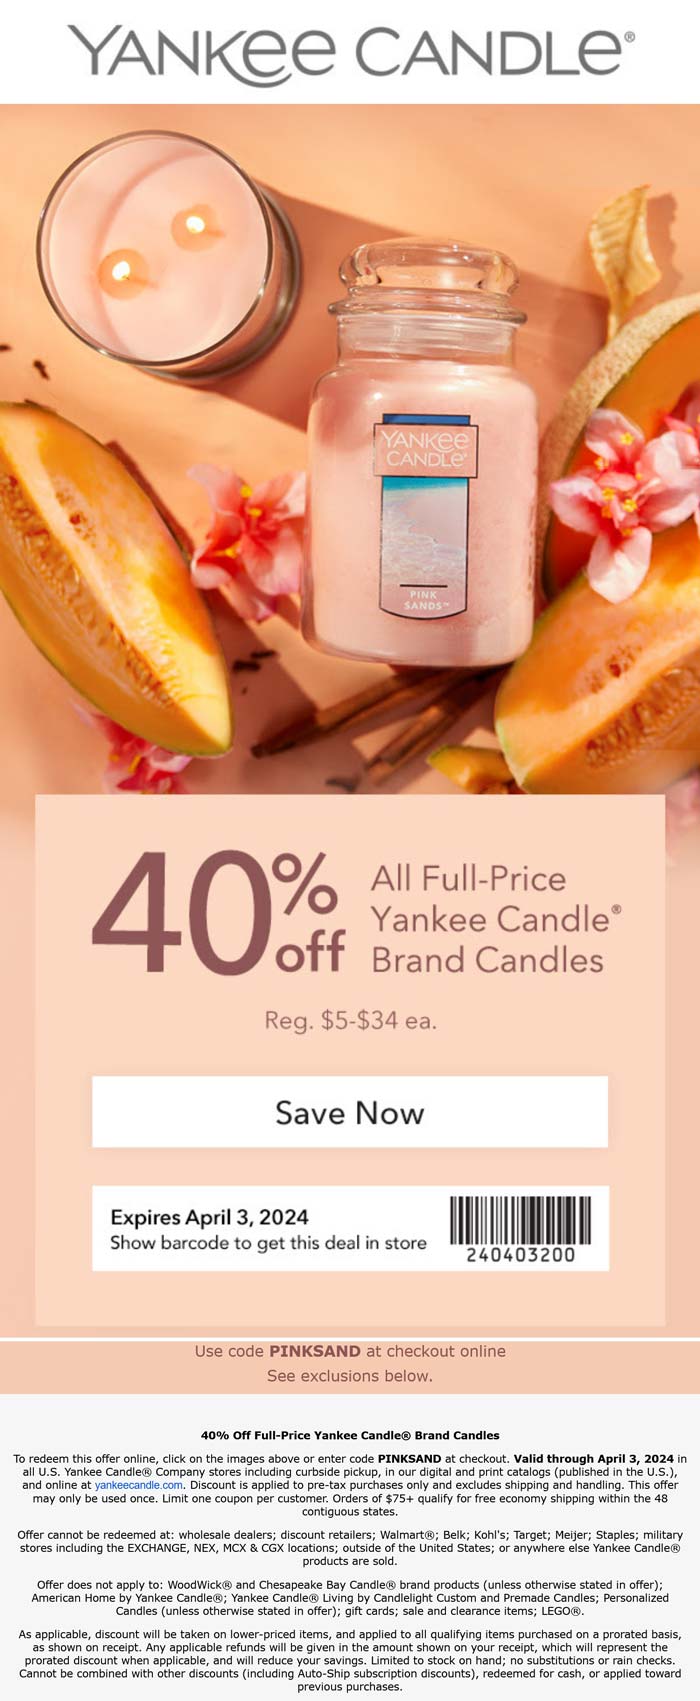 Yankee Candle stores Coupon  40% off candles today at Yankee Candle, or online via promo code PINKSAND #yankeecandle 